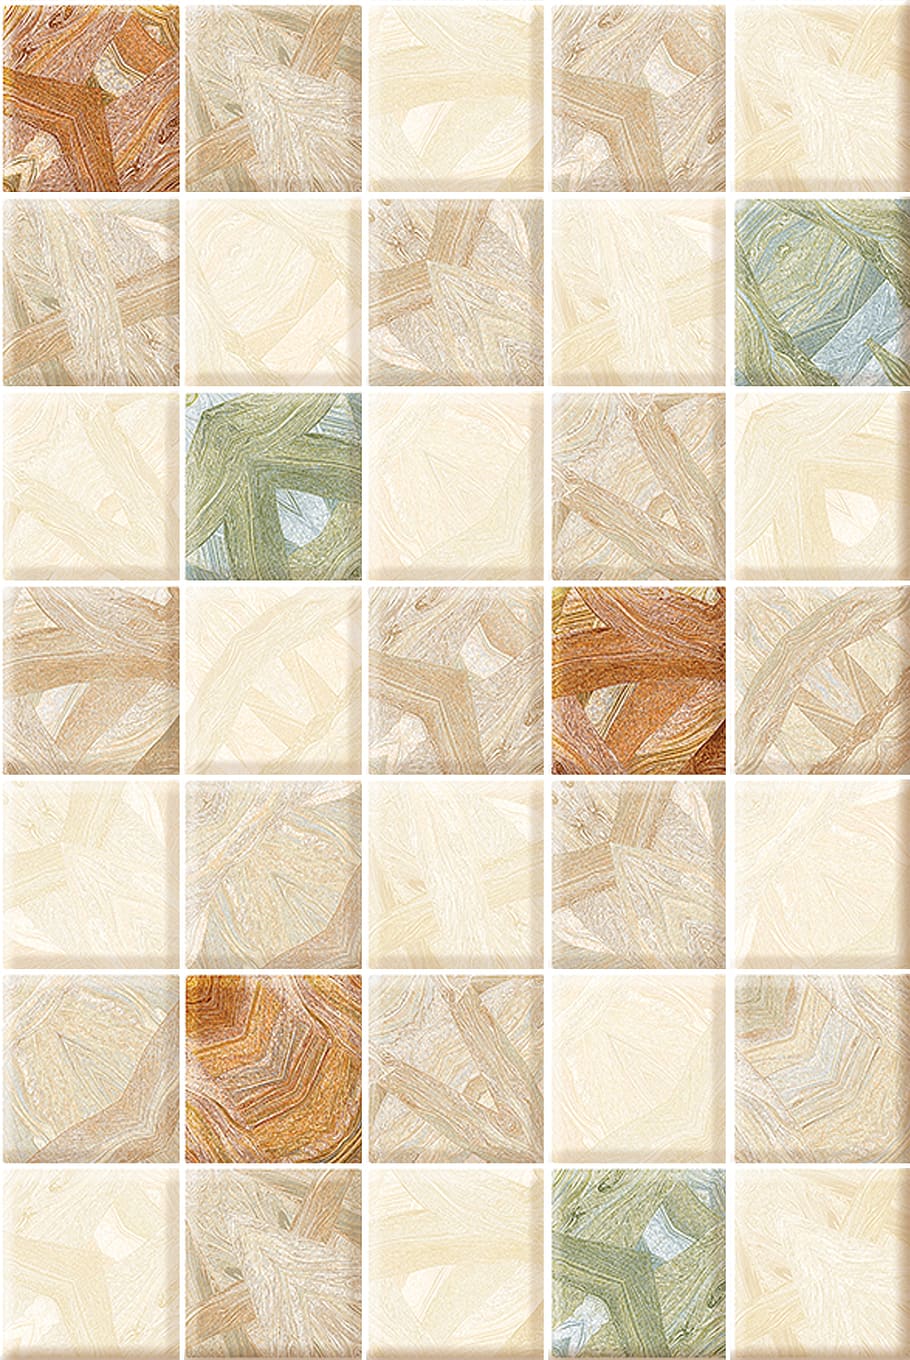 pattern, abstract, mosaic, tile, wallpaper, backgrounds, full frame